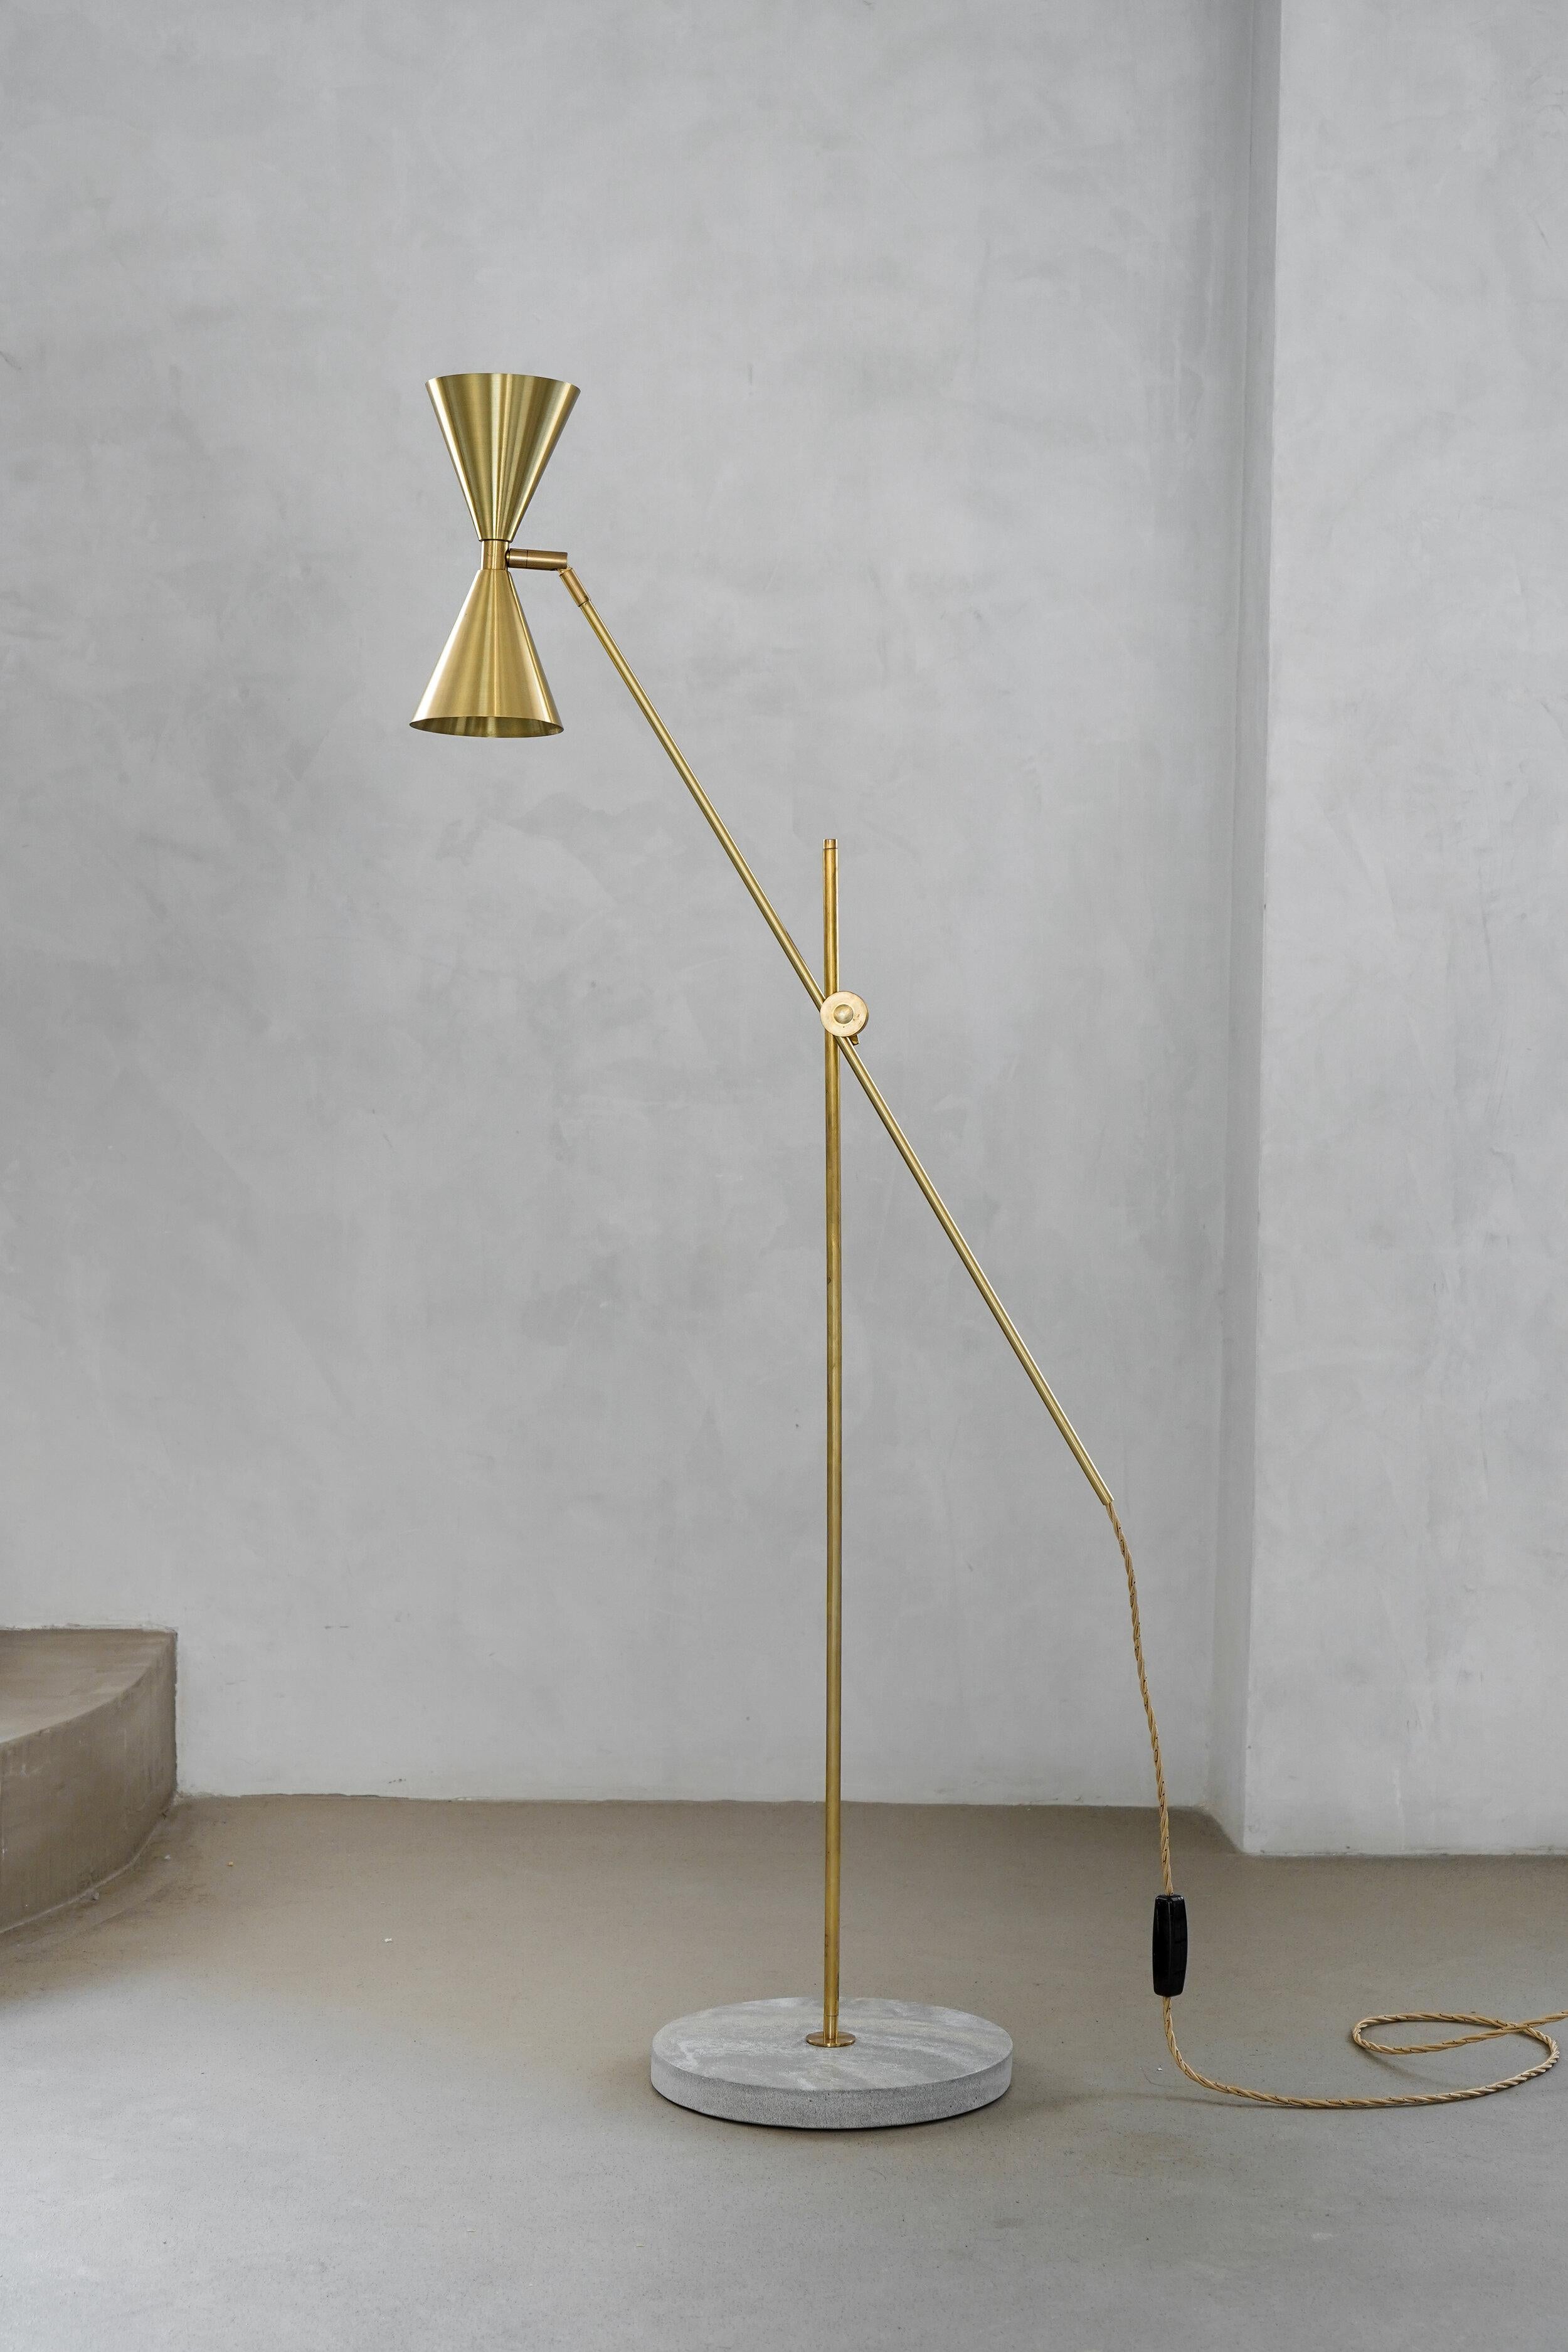 Cone Double Floor Lamp by Contain
Dimensions: D12 x H130cm 
Materials: Brass structure, opal glass and stone base.
Also available in different finishes.

All our lamps can be wired according to each country. If sold to the USA it will be wired